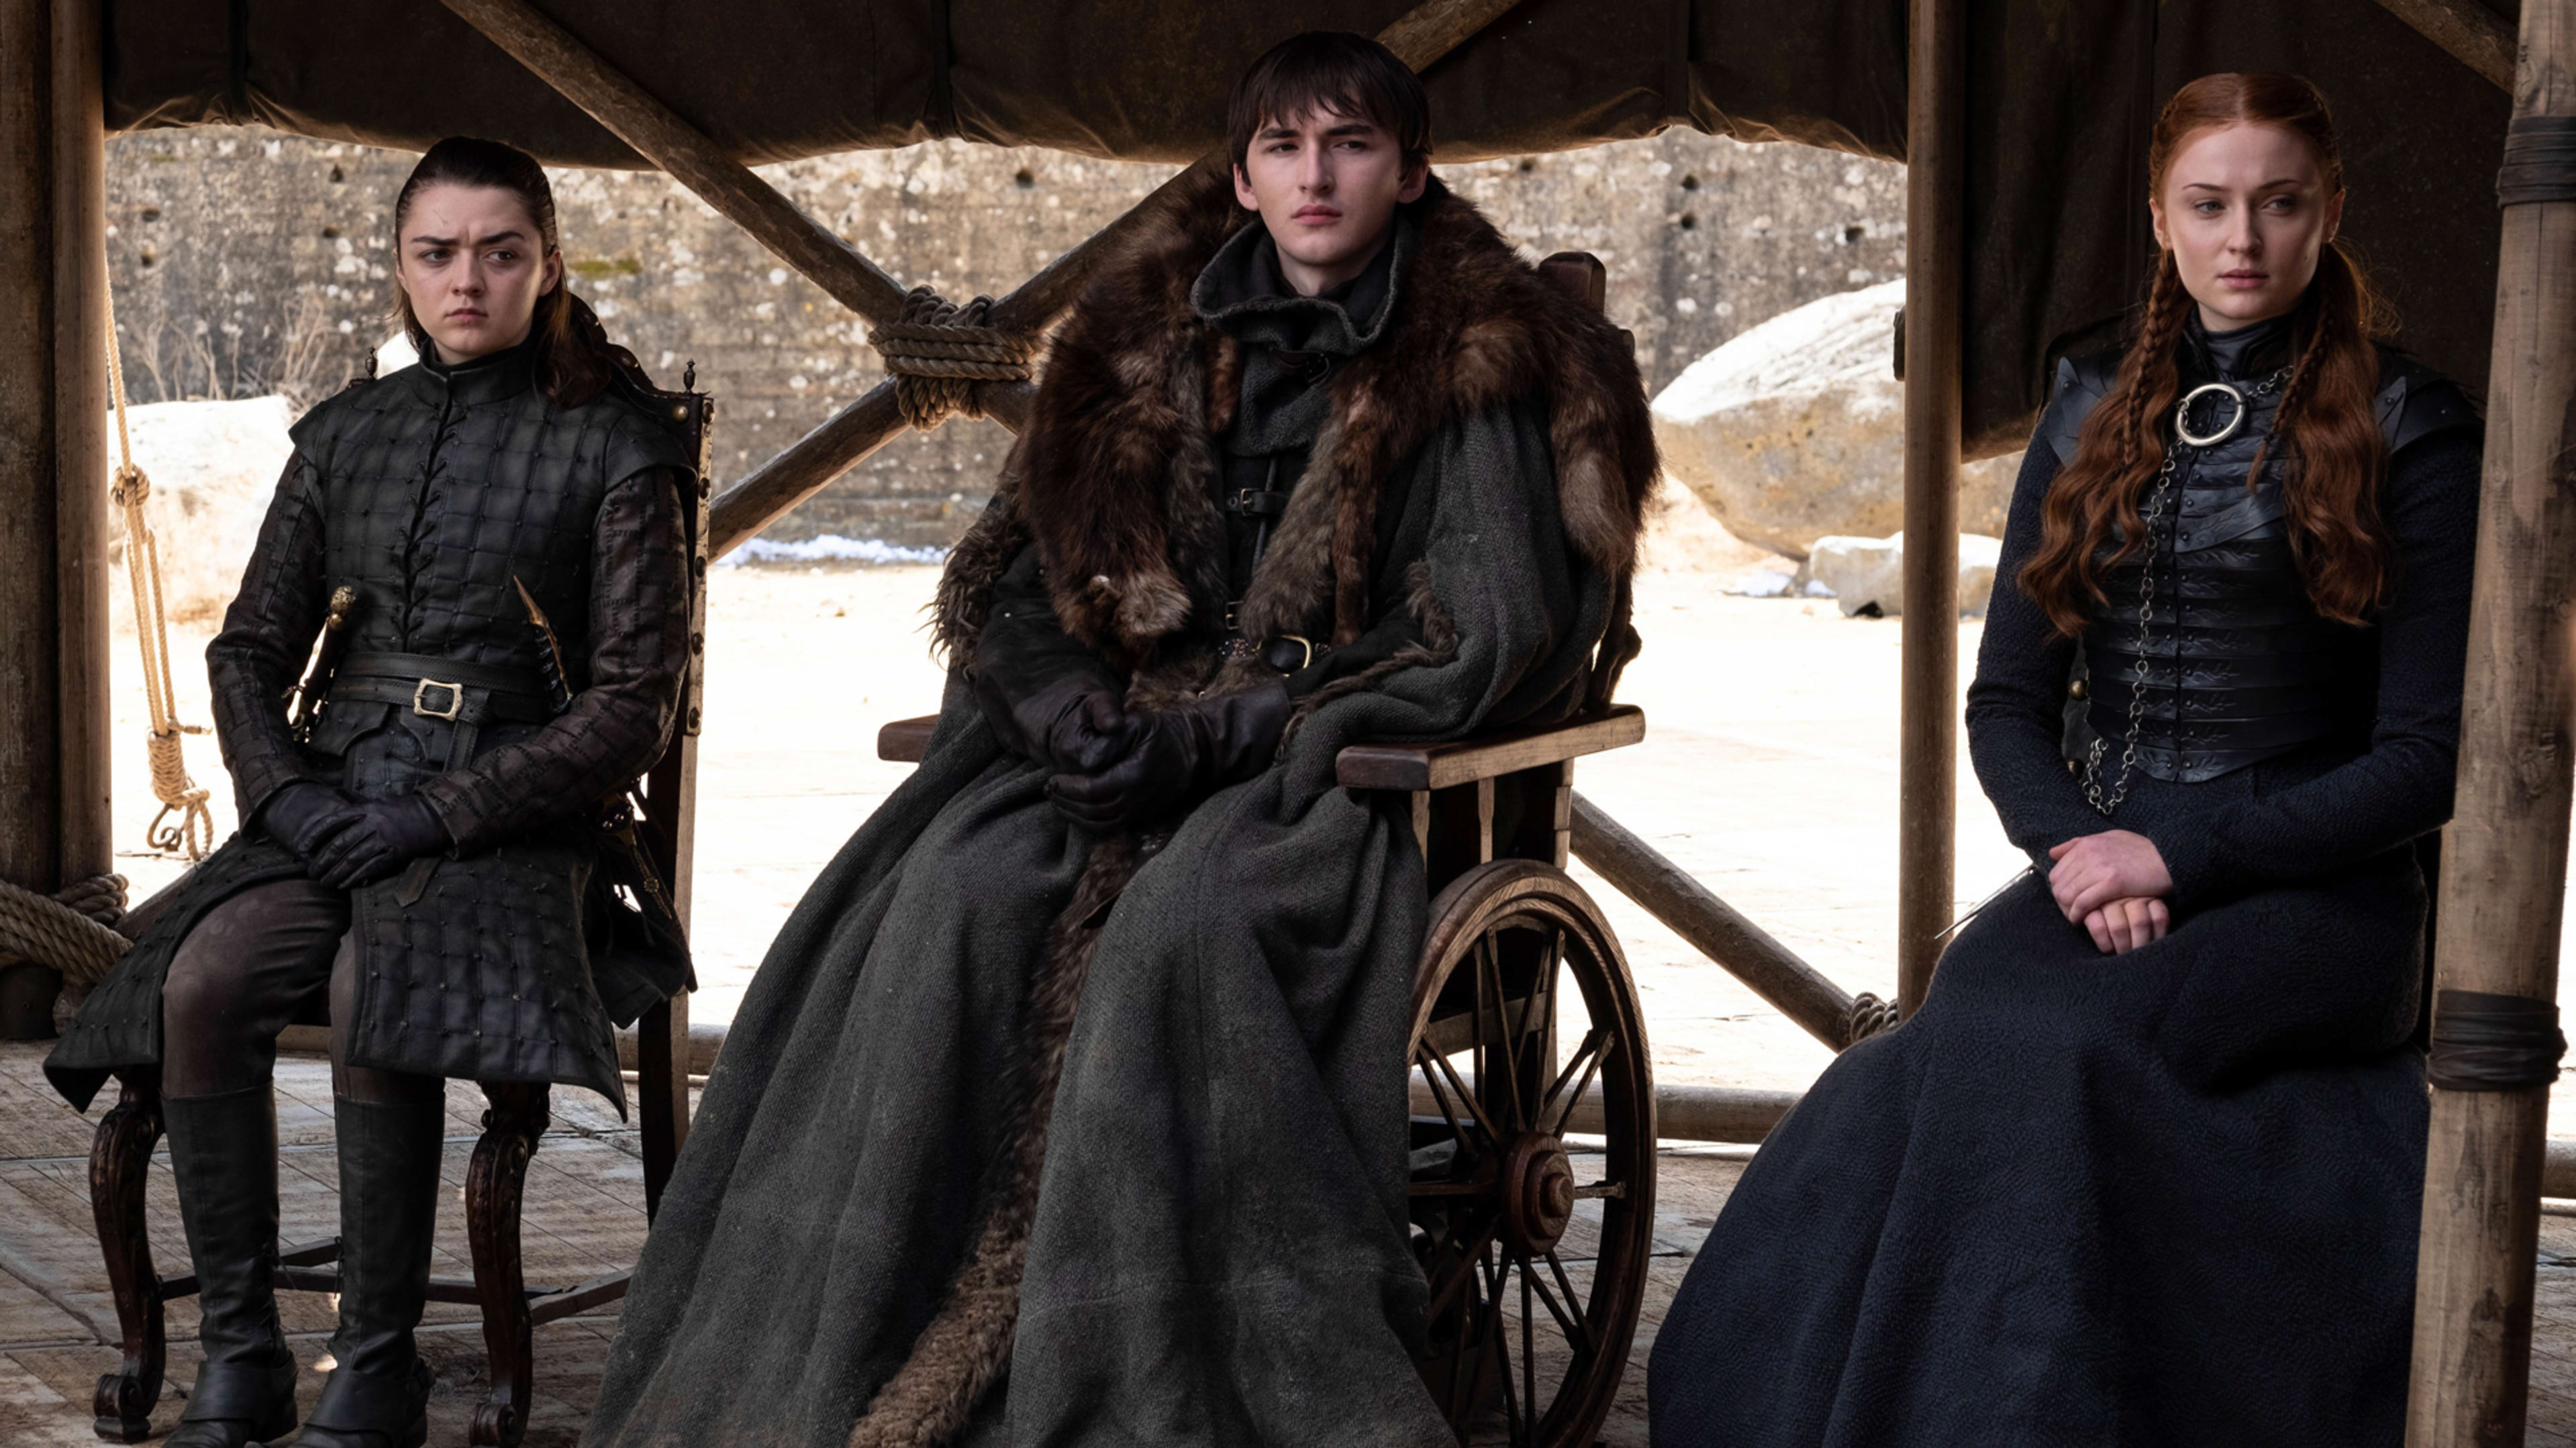 This alternate ending finally gives Game of Thrones fans what they want (no petition required)